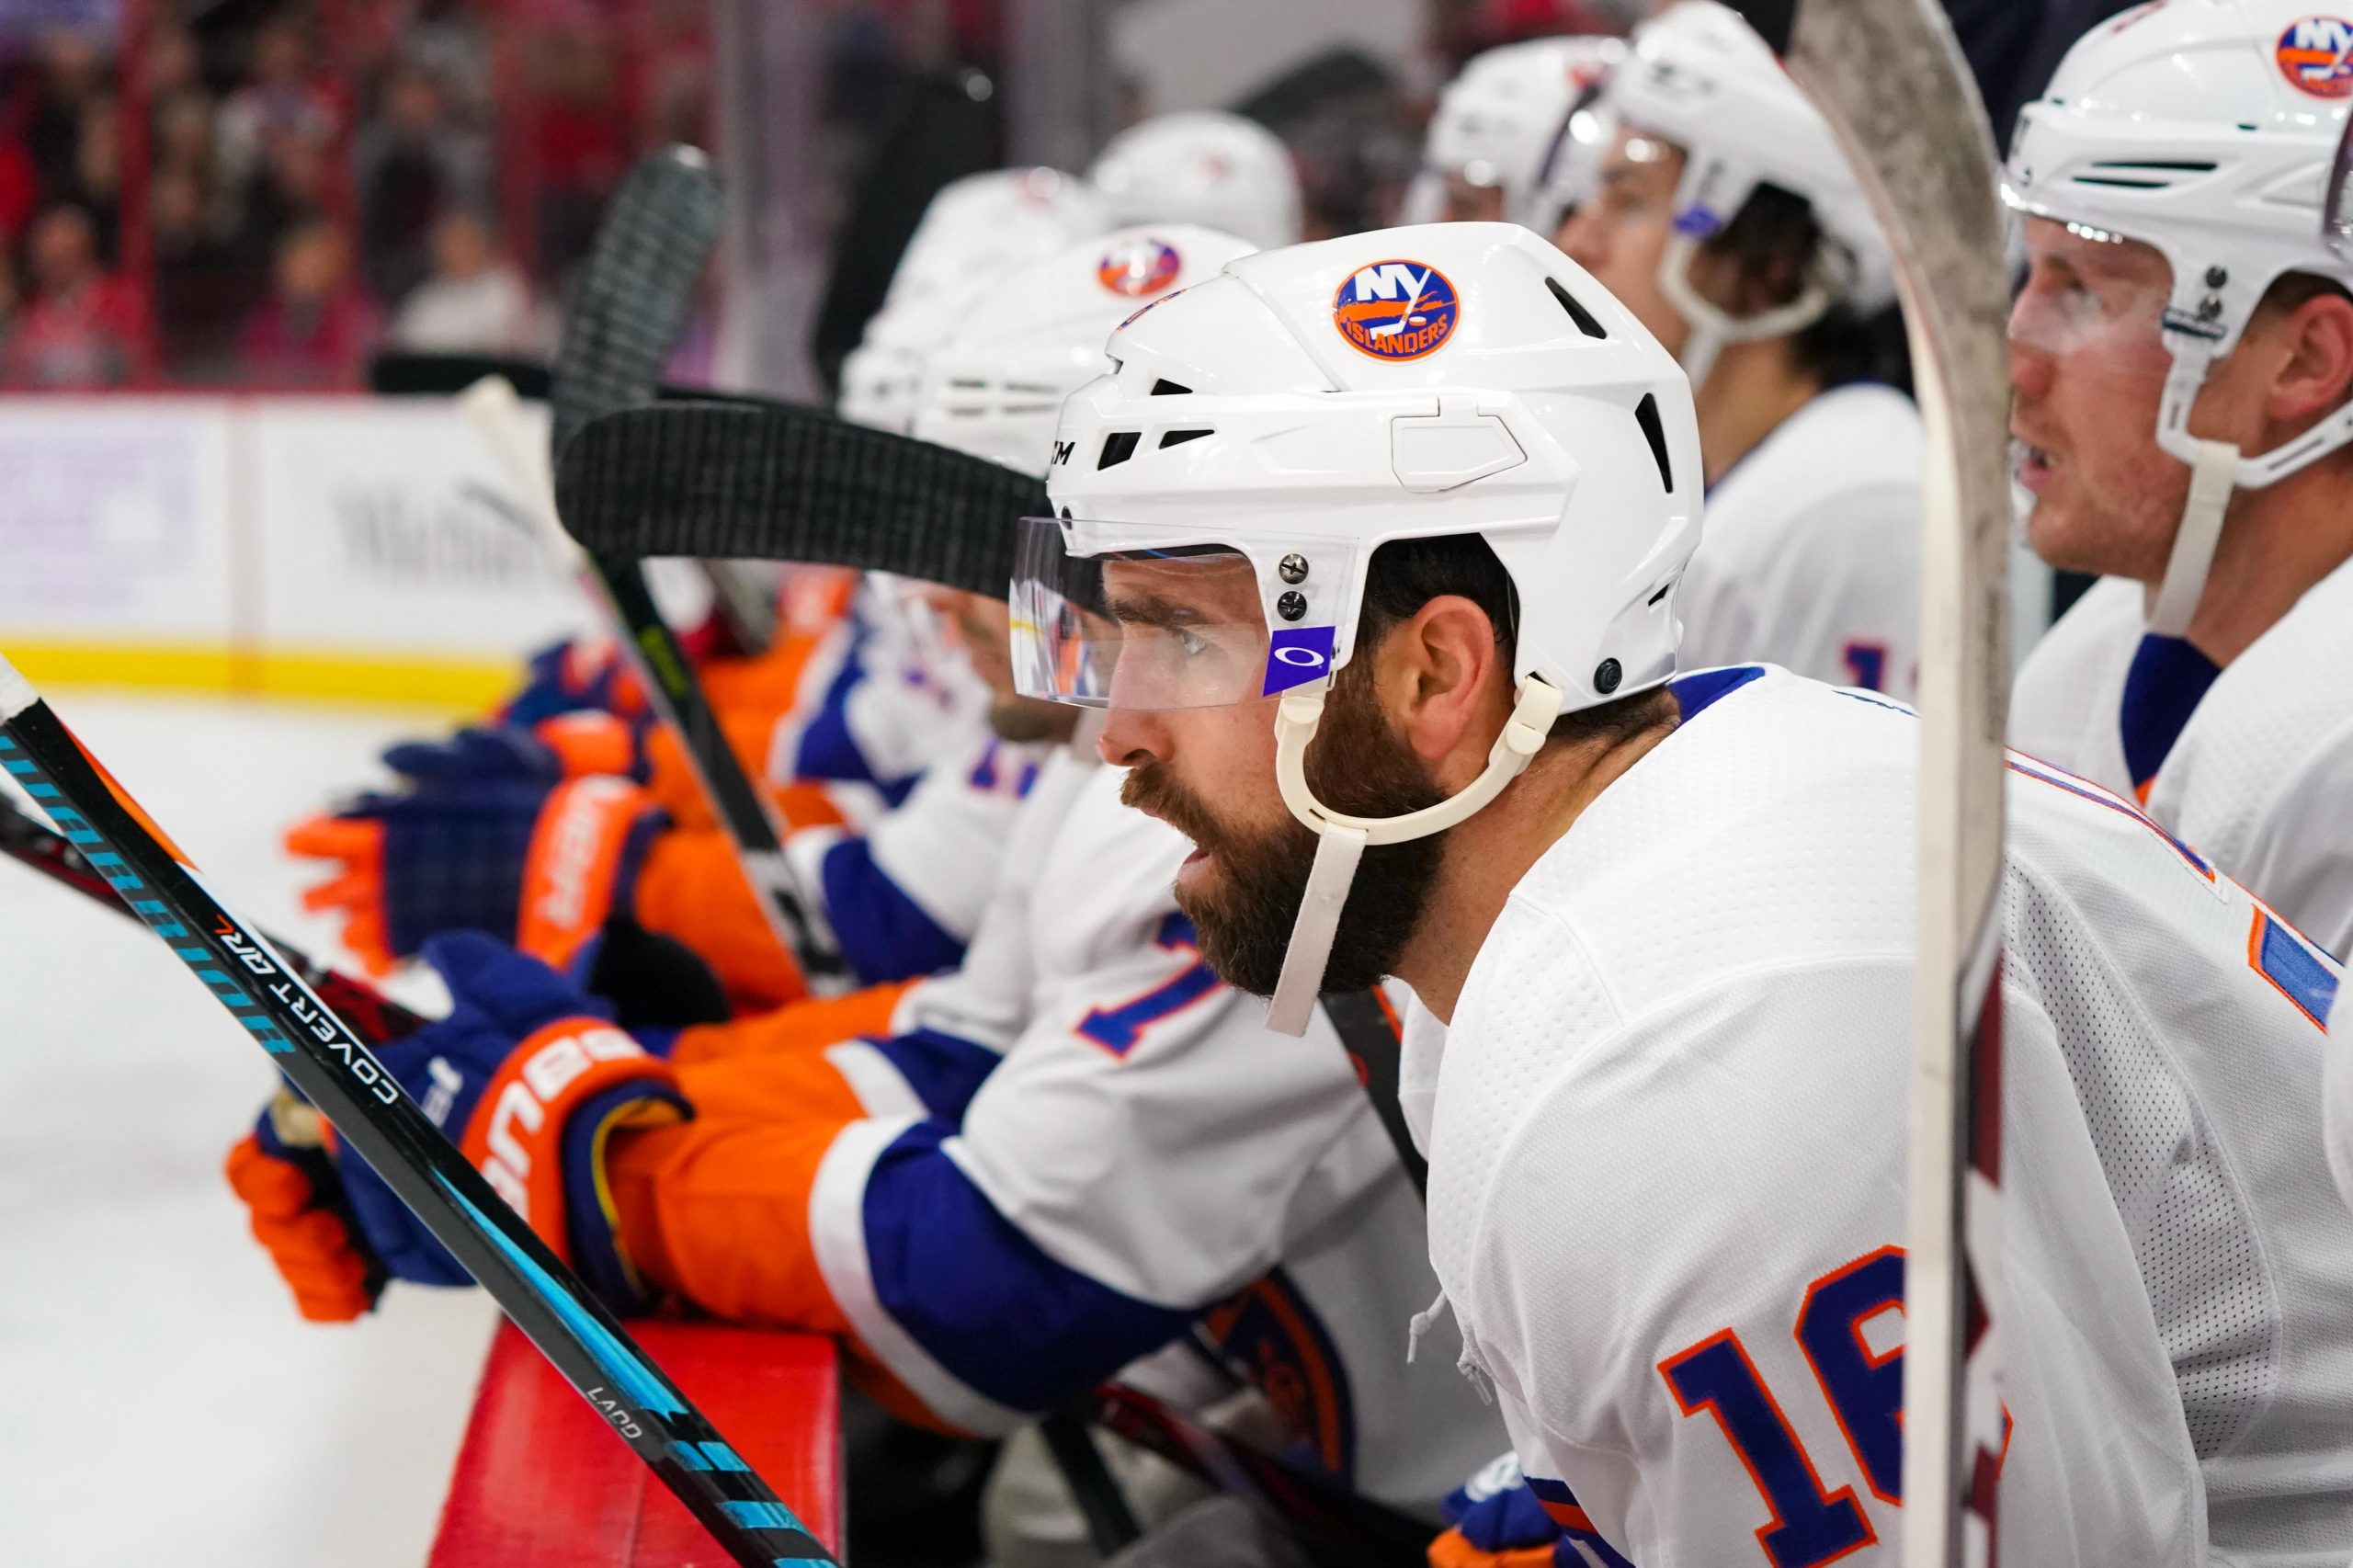 Nov 19, 2017; Raleigh, NC, USA; New York Islanders forward Andrew Ladd (16) looks on from the players bench against the Carolina Hurricanes at PNC Arena. The Carolina Hurricanes defeated the New York Islanders 4-2. Mandatory Credit: James Guillory-USA TODAY Sports